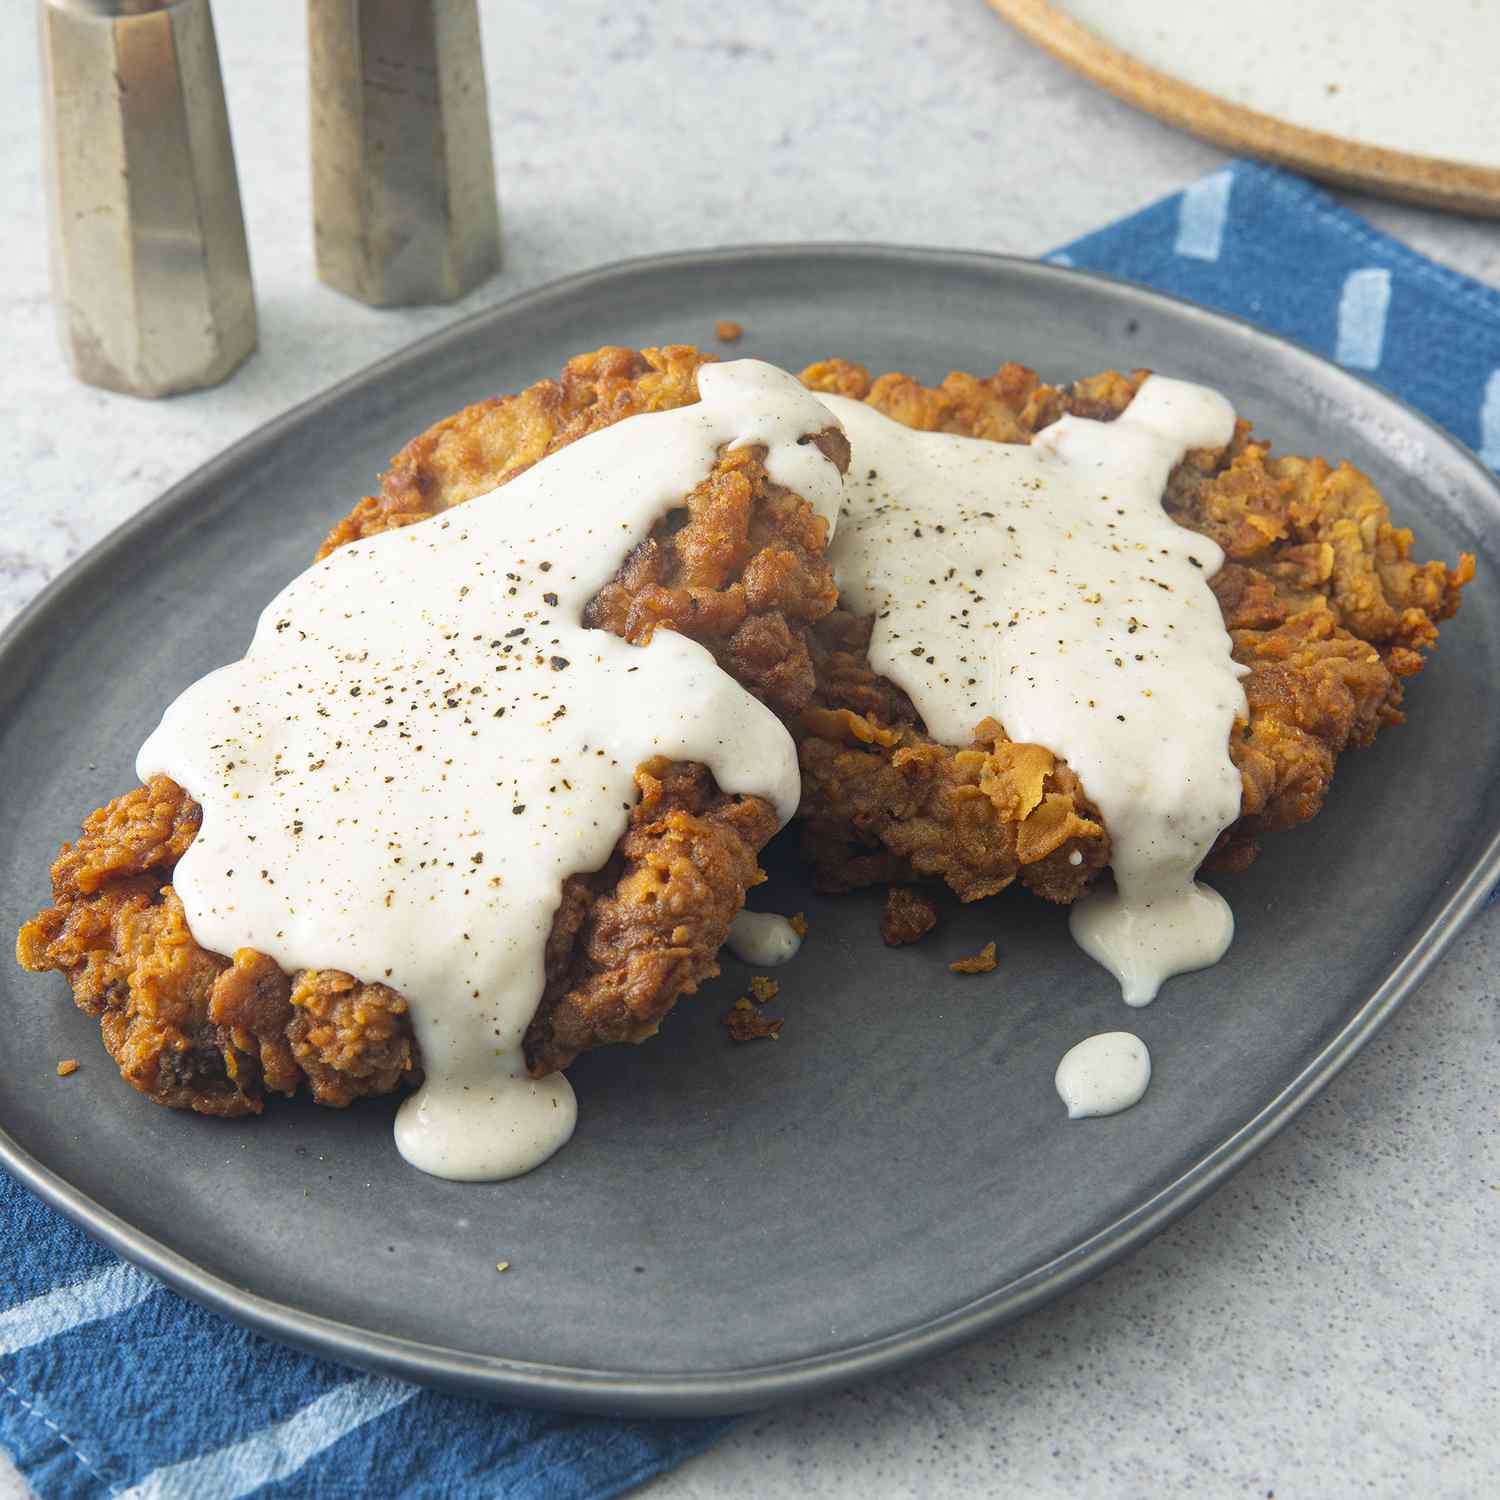 close up view of Chicken Fried Steak with gravy on top, on a plate